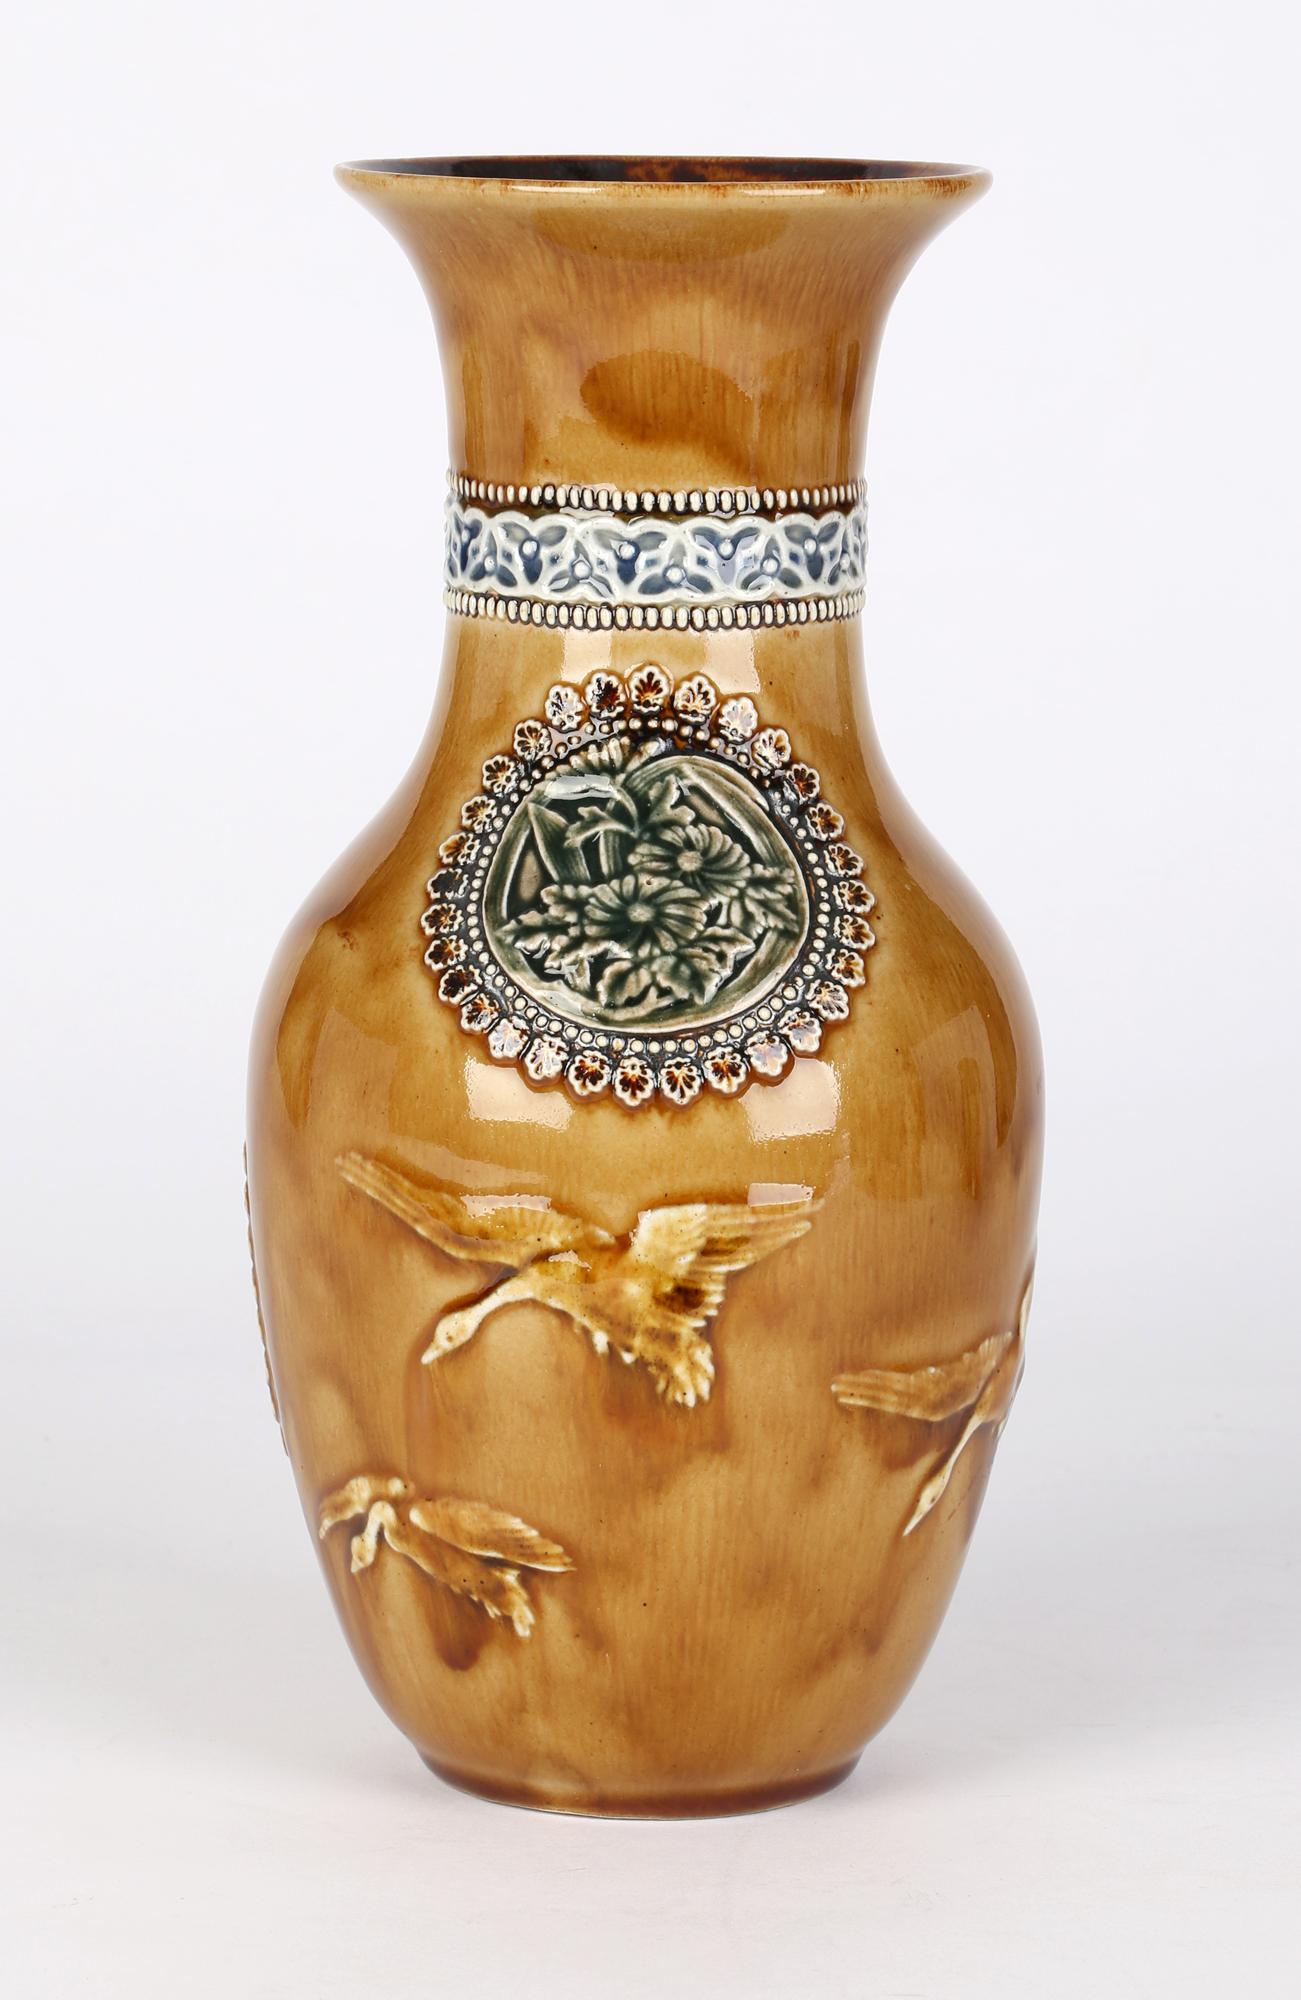 Glazed Doulton Lambeth Aesthetic Movement Vase with Geese by Lizzie Axford